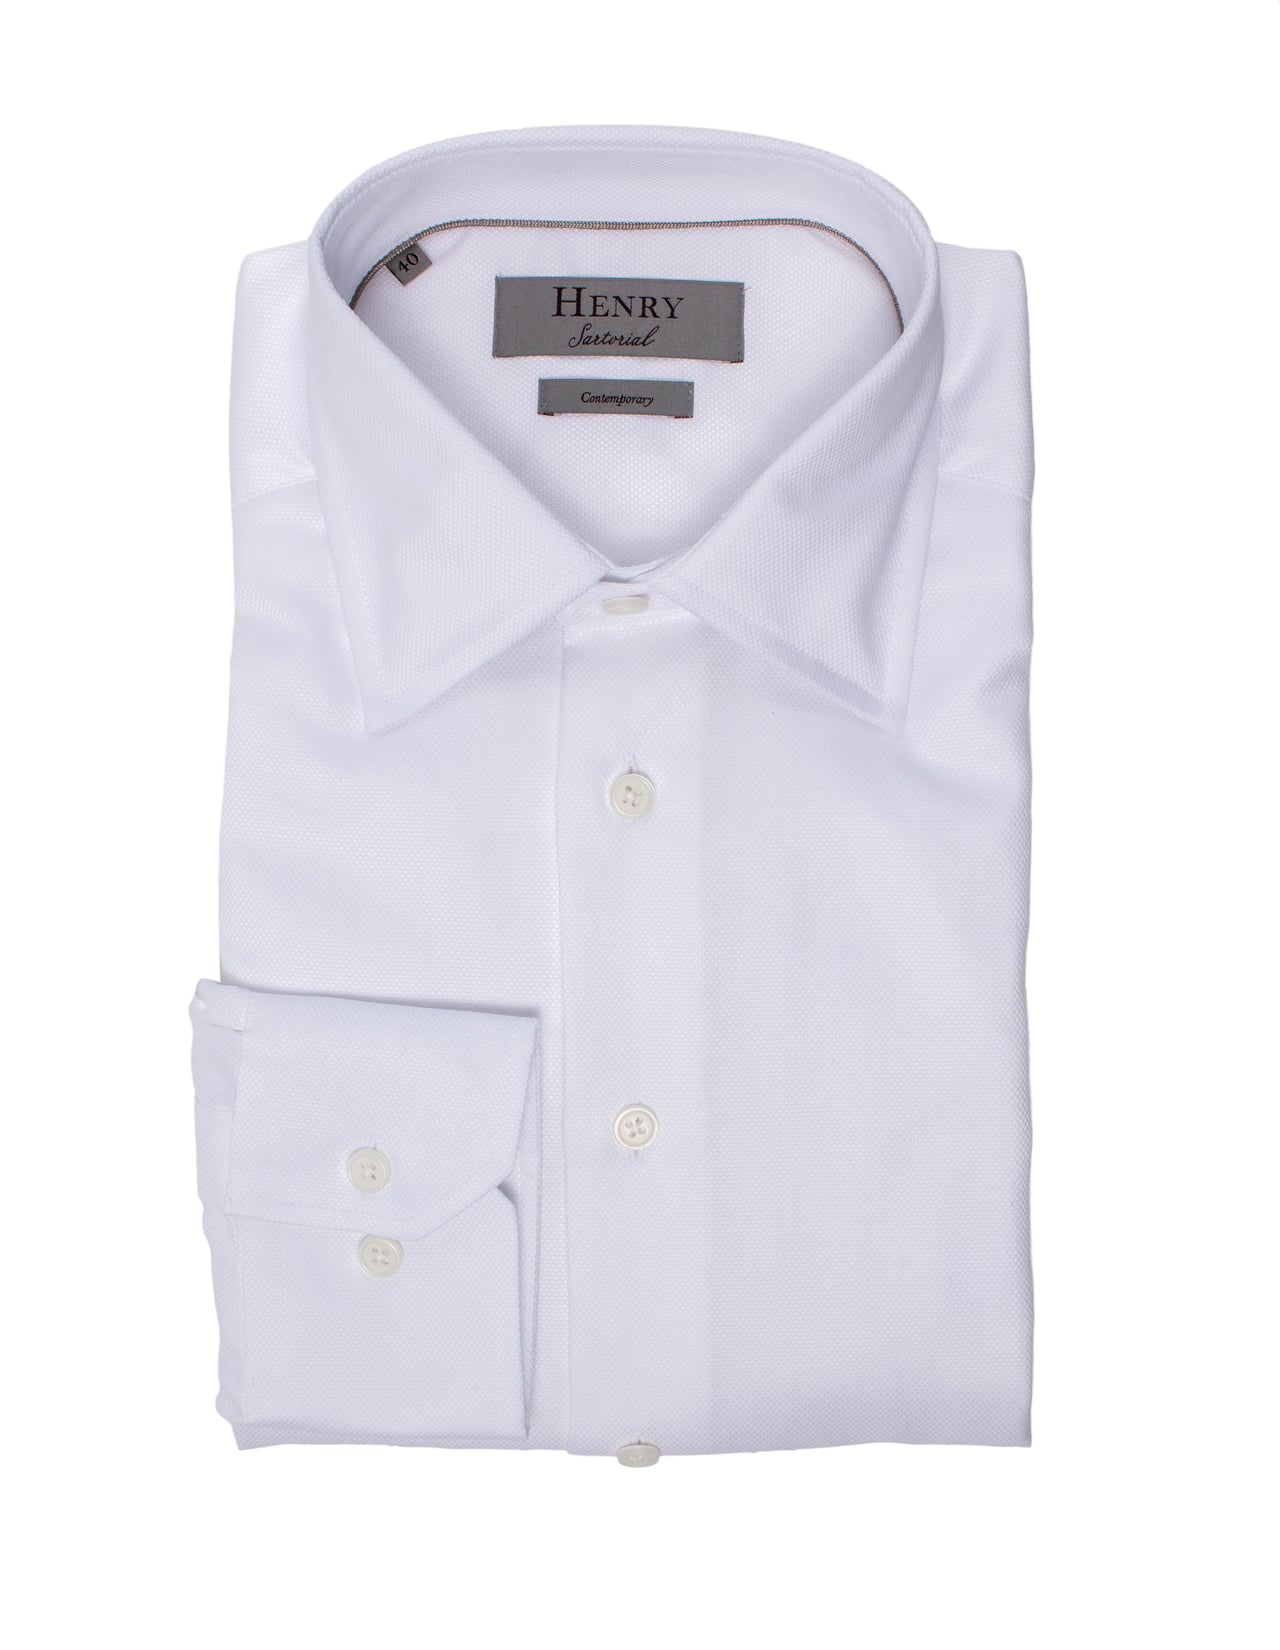 HENRY SARTORIAL Contemporary Fit Oxford Shirt WHITE